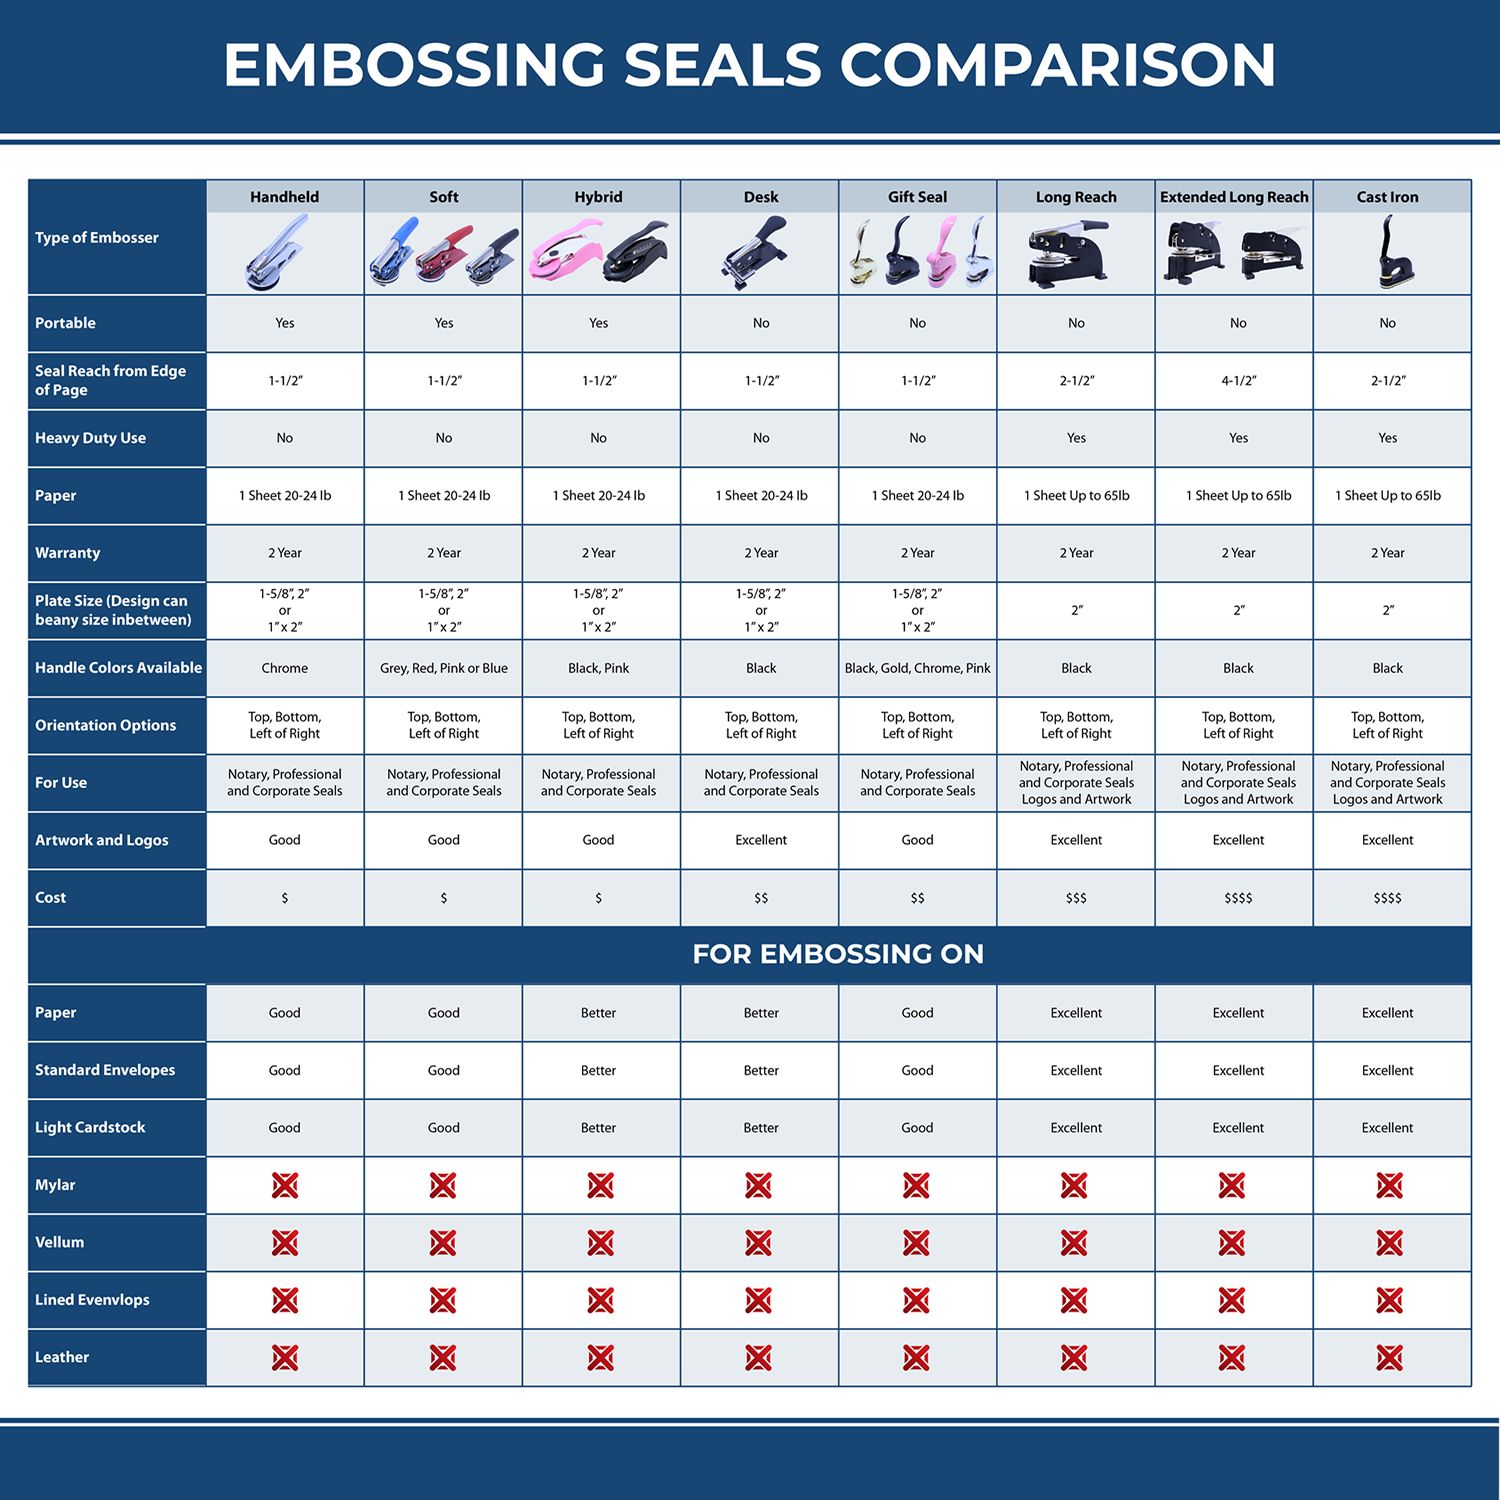 A comparison chart for the different types of mount models available for the Heavy Duty Cast Iron North Carolina Architect Embosser.